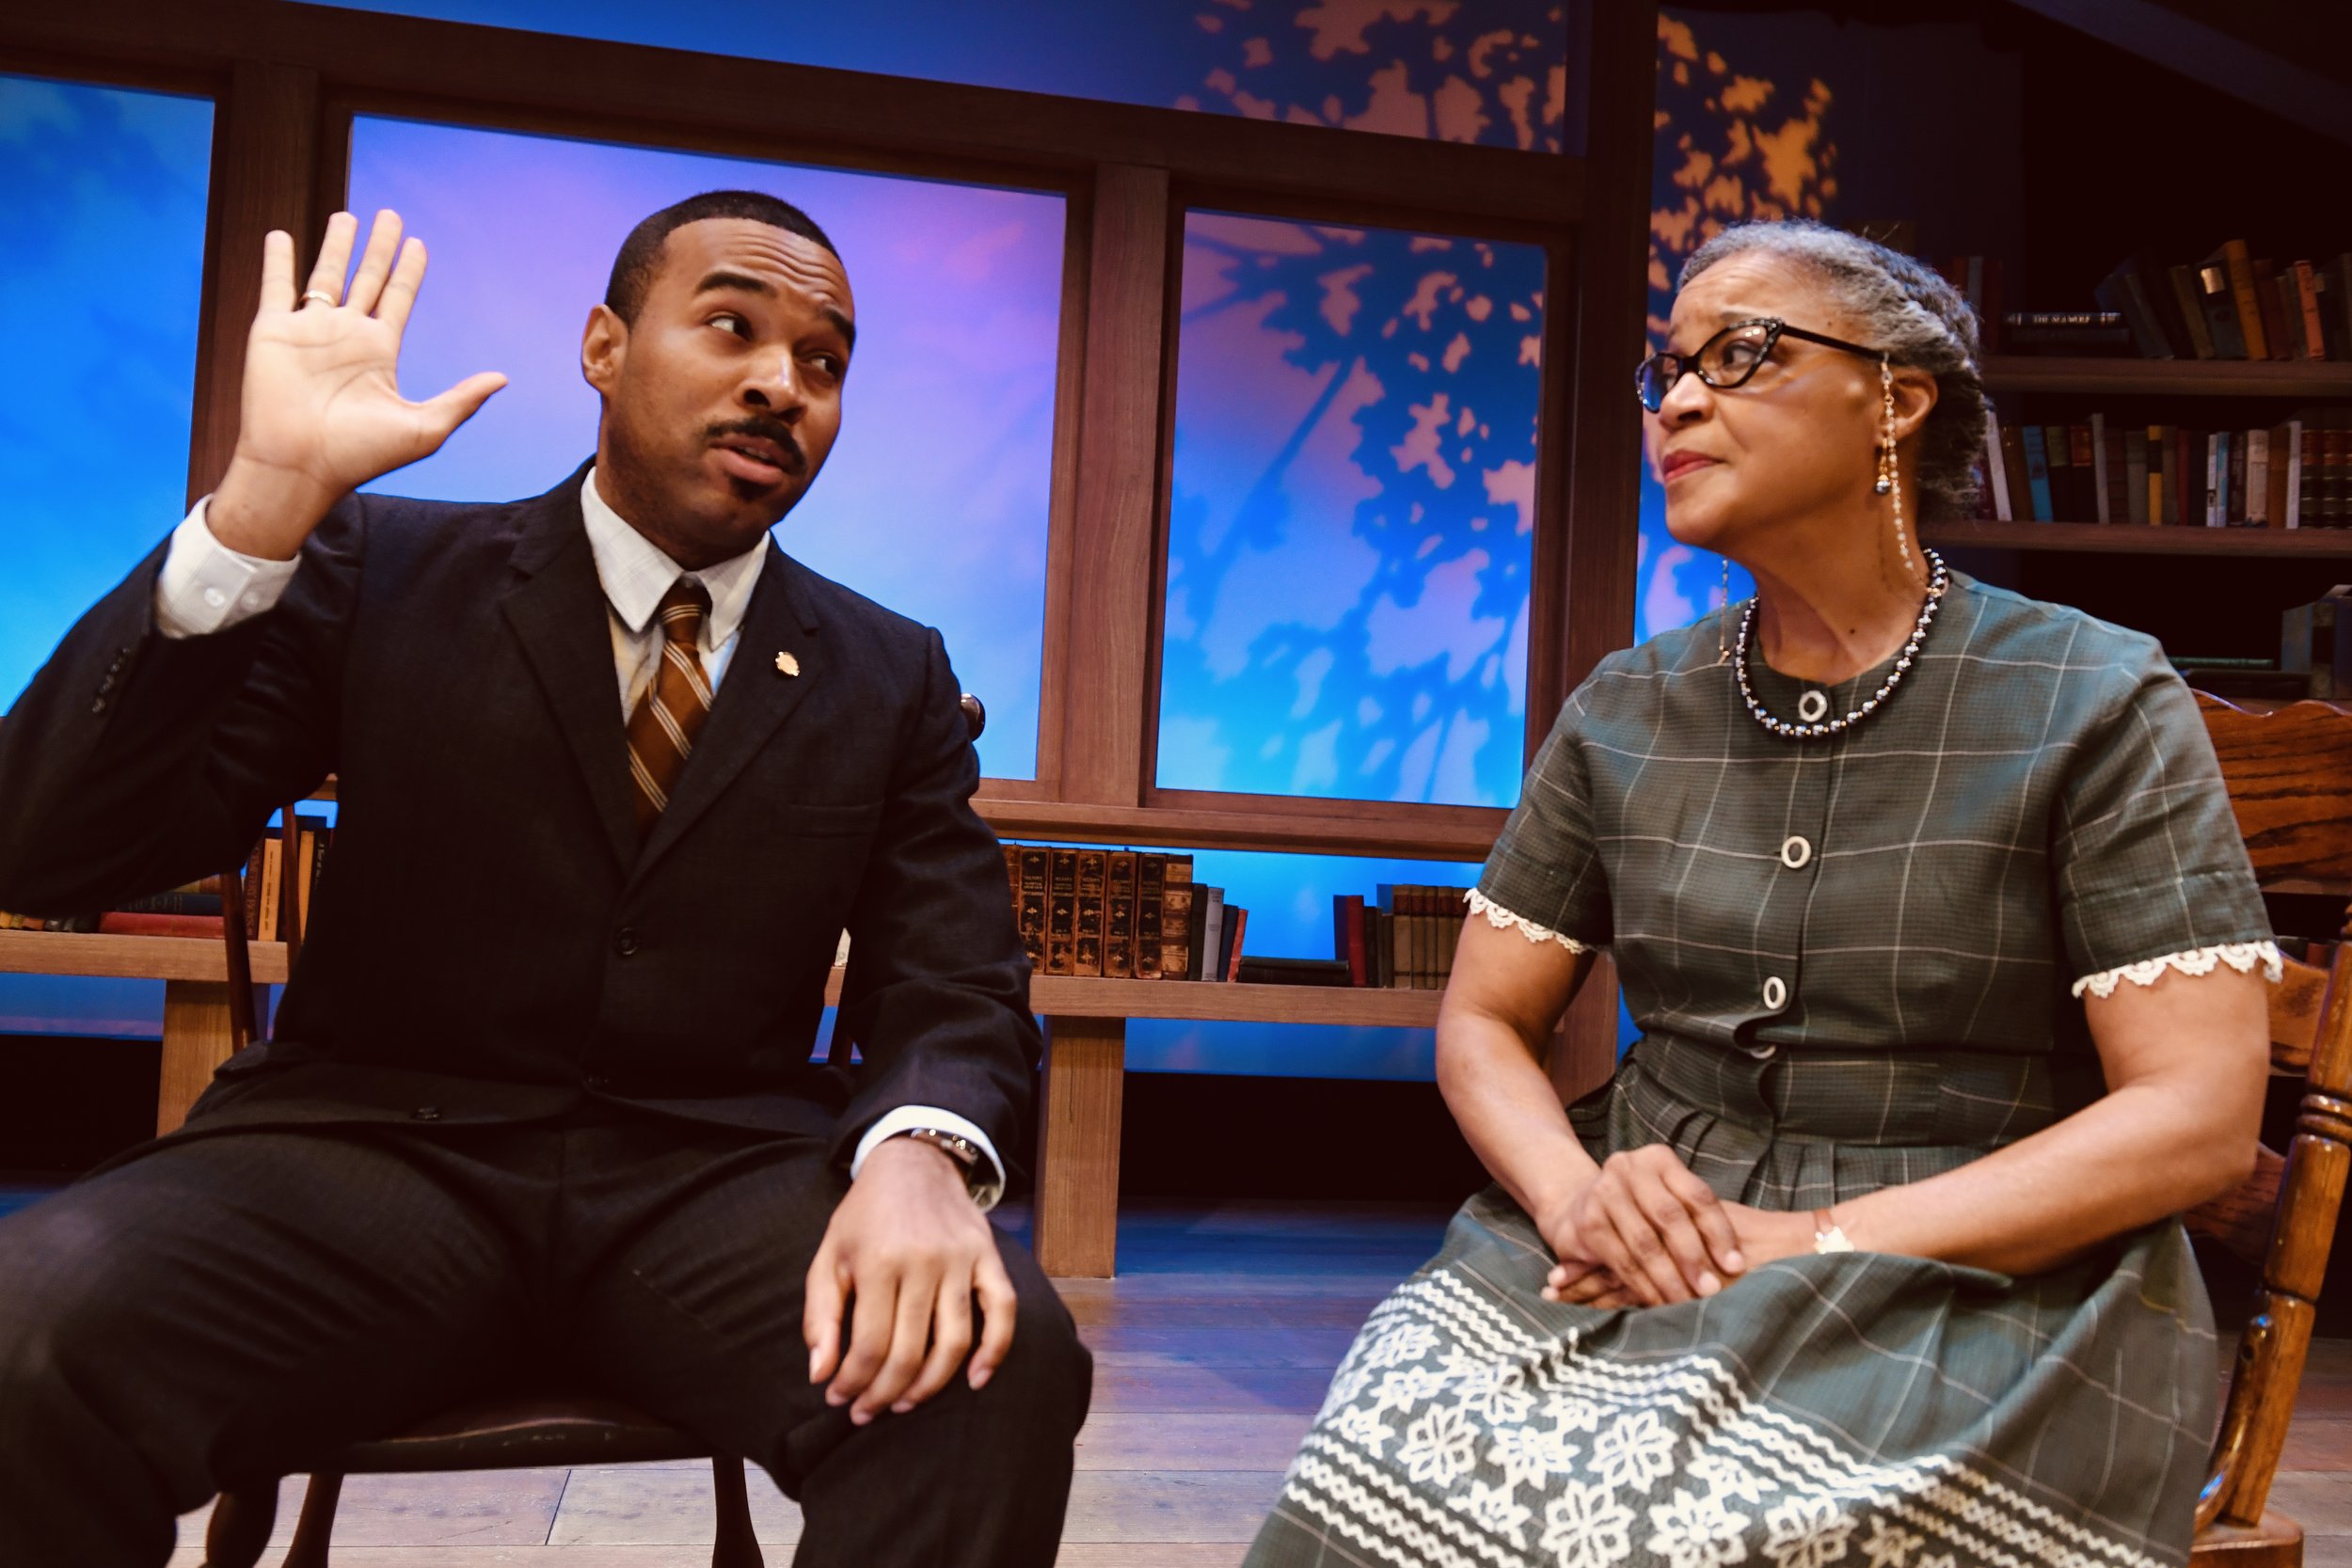  San Jose Stage Company’s West Coast Premiere of PEOPLE WHERE THEY ARE by ANTHONY CLARVOE. Directed BENNY SATO AMBUSH featuring TERRANCE AUSTIN SMITH* as JOHN and CATHLEEN RIDDLEY* as MRS. CLARK.  January 31st though February 25th, 2024  Photo by DAV